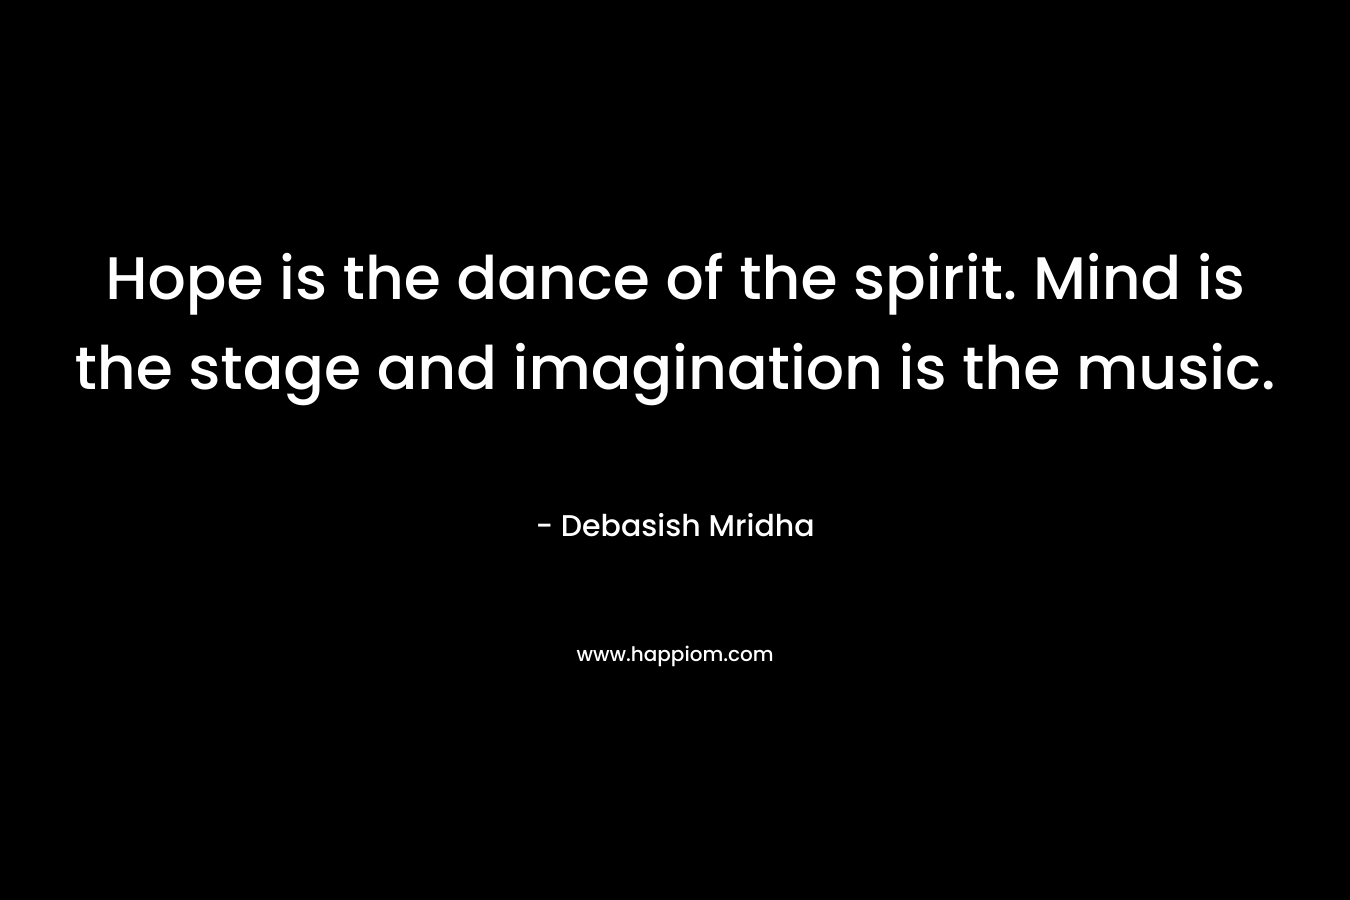 Hope is the dance of the spirit. Mind is the stage and imagination is the music.